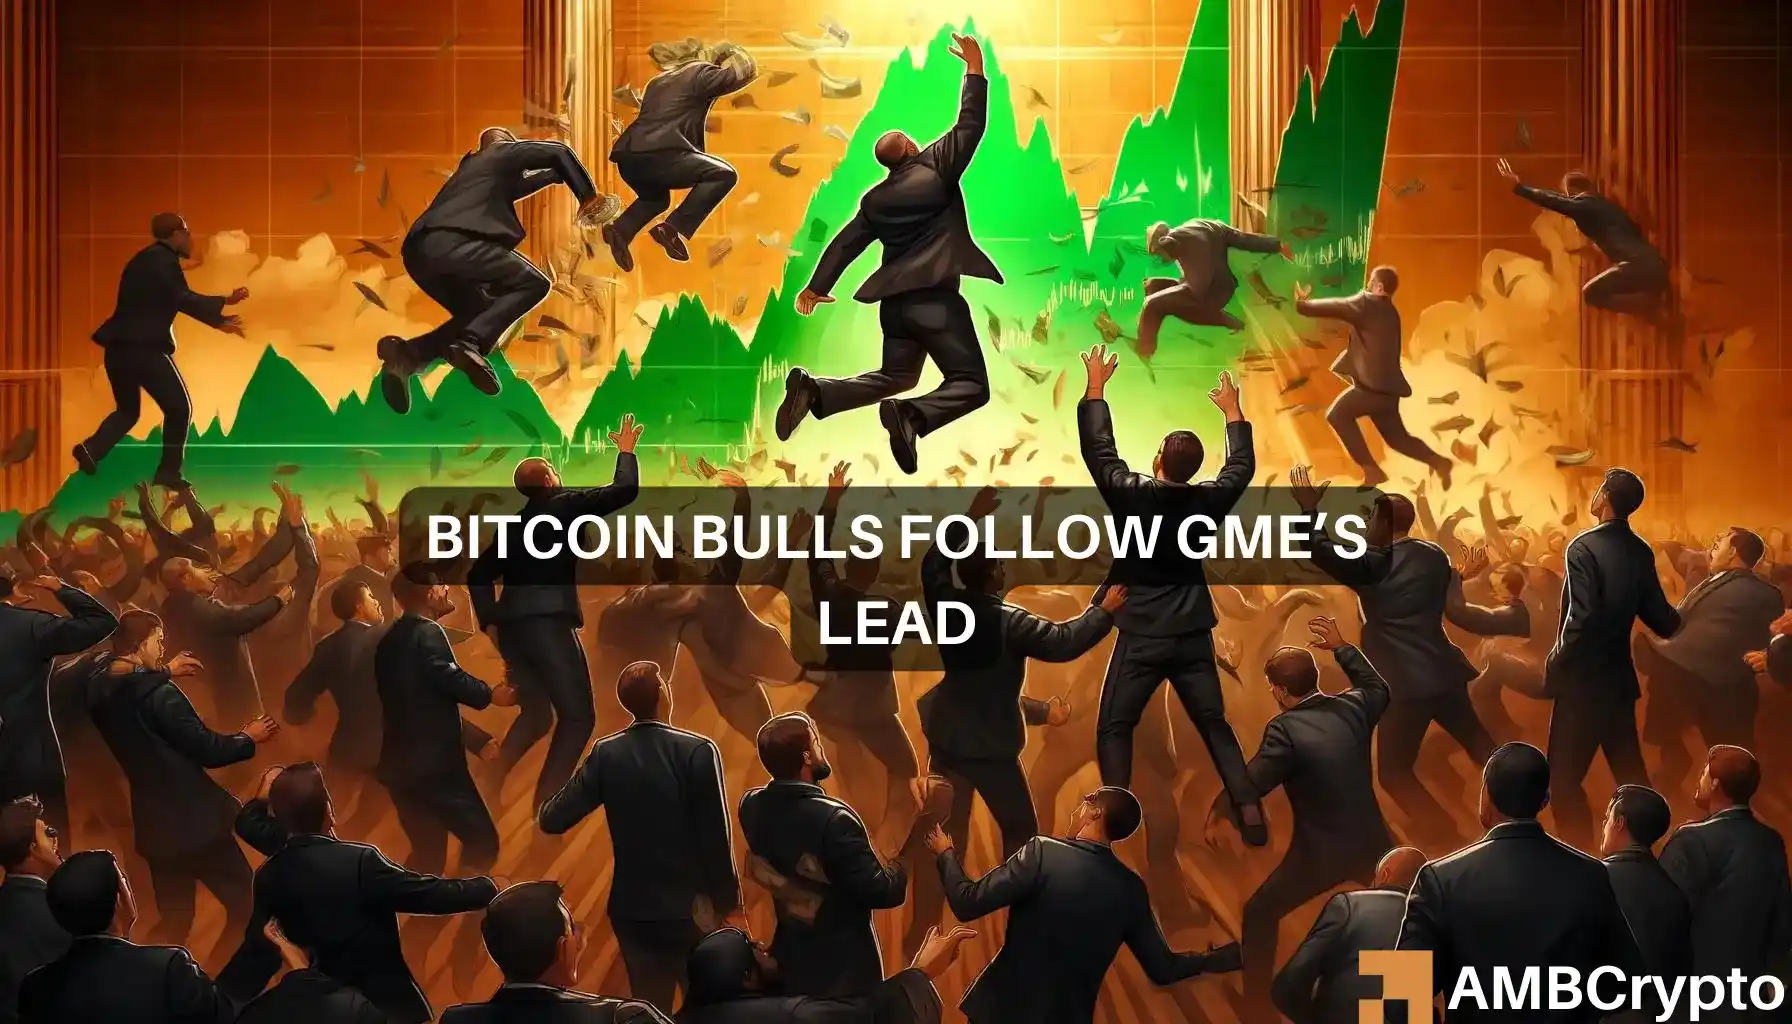 How to predict Bitcoin cycle tops using GameStop and GME’s social volume